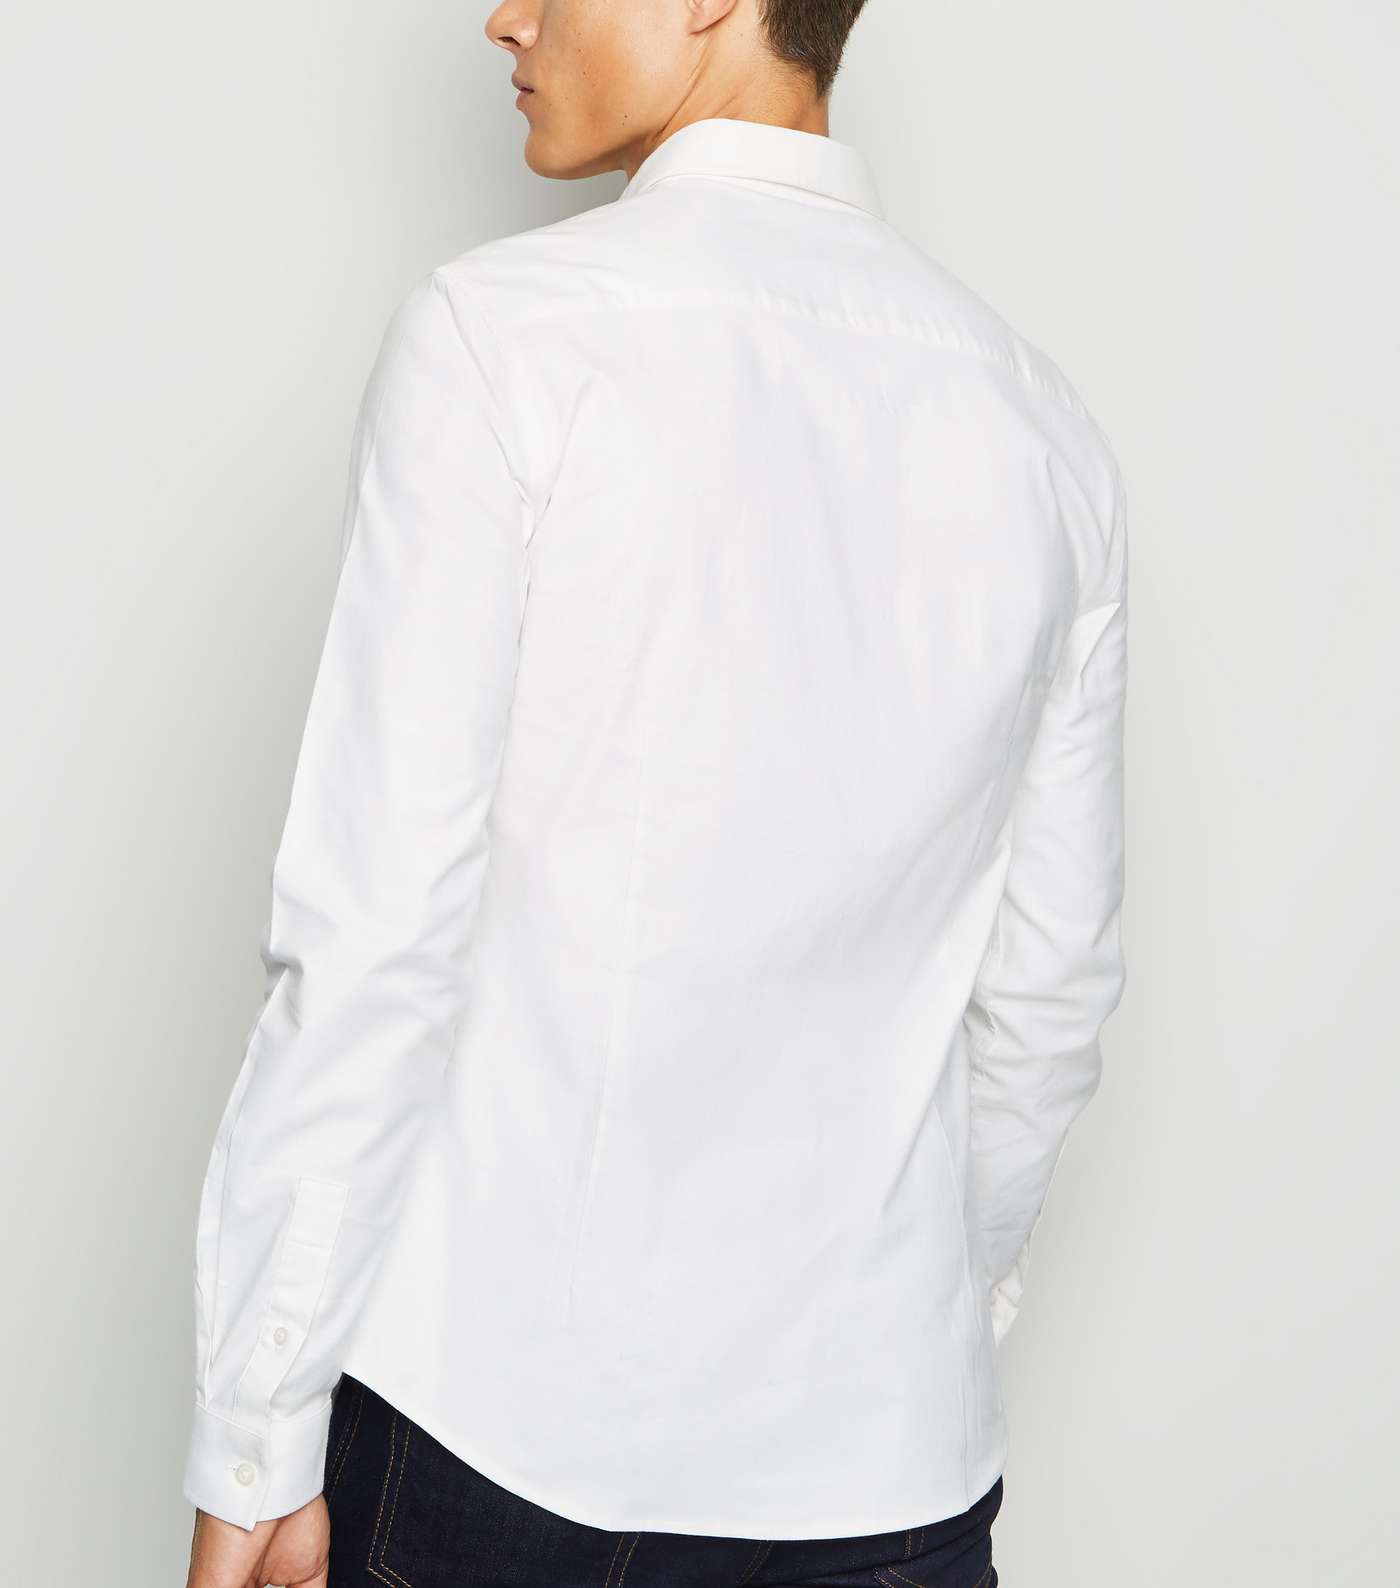 White Long Sleeve Muscle Fit Oxford Shirt Image 3